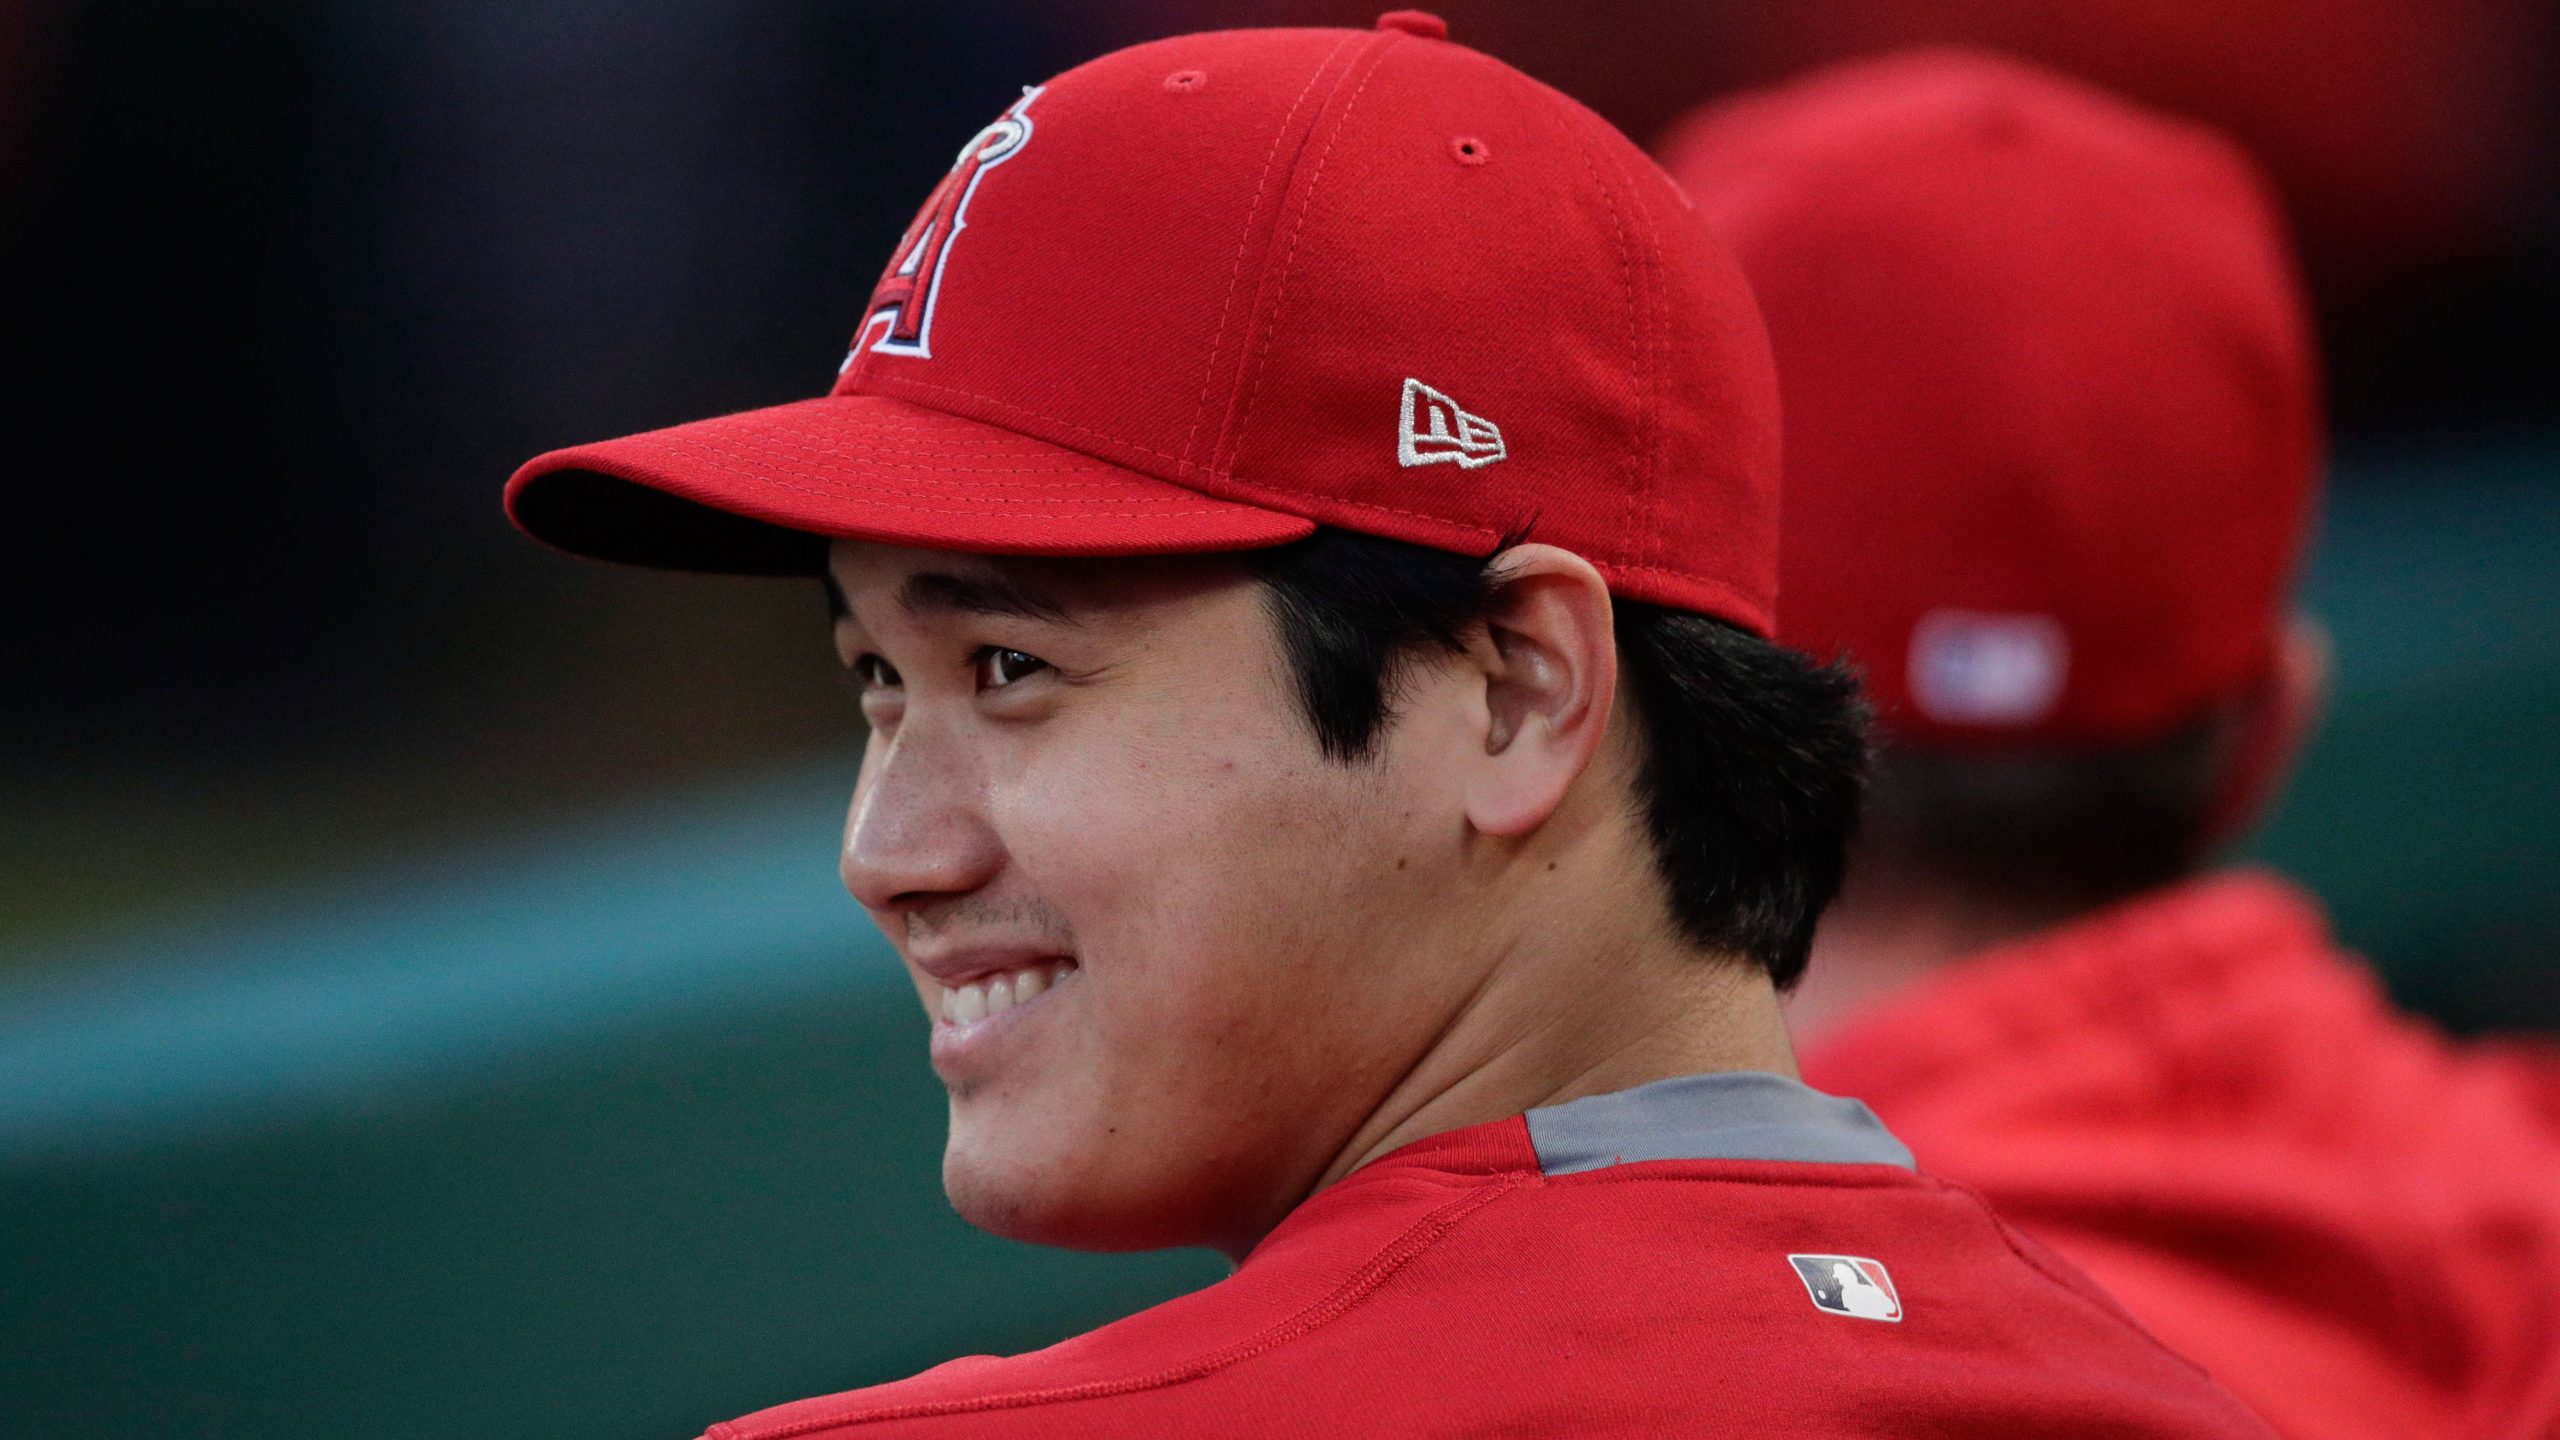 Los-Angeles-Angels'-Shohei-Ohtani,-of-Japan,-smiles-in-the-dugout-before-the-team's-baseball-game-against-the-Milwaukee-Brewers,-Wednesday,-April-10,-2019,-in-Anaheim,-Calif.-(AP-Photo/Jae-C.-Hong)